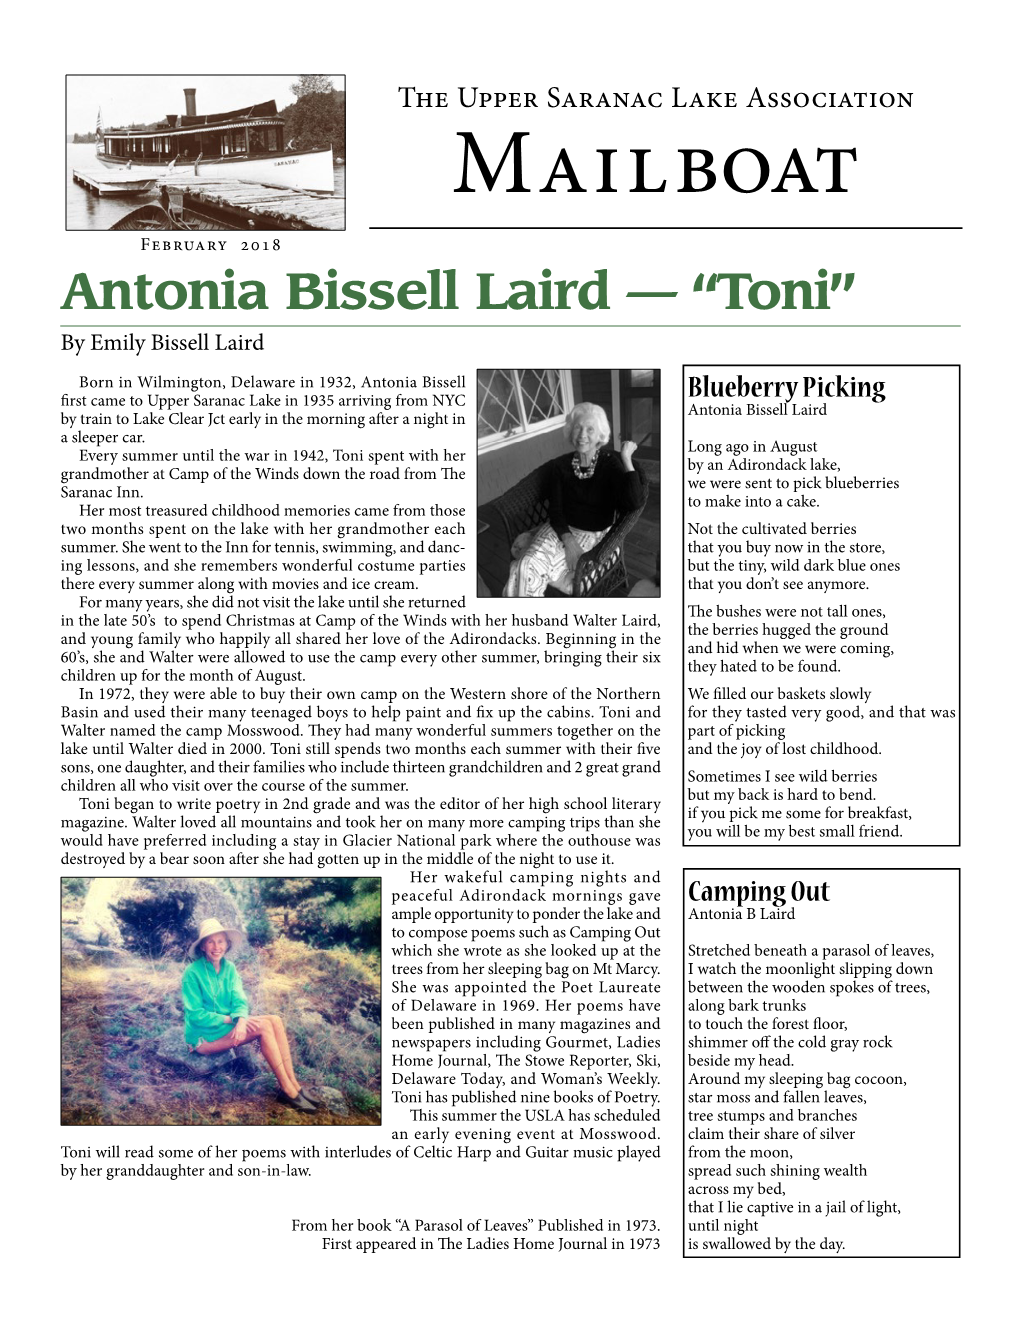 The Upper Saranac Lake Association Mailboat February 2018 Antonia Bissell Laird — “Toni” by Emily Bissell Laird